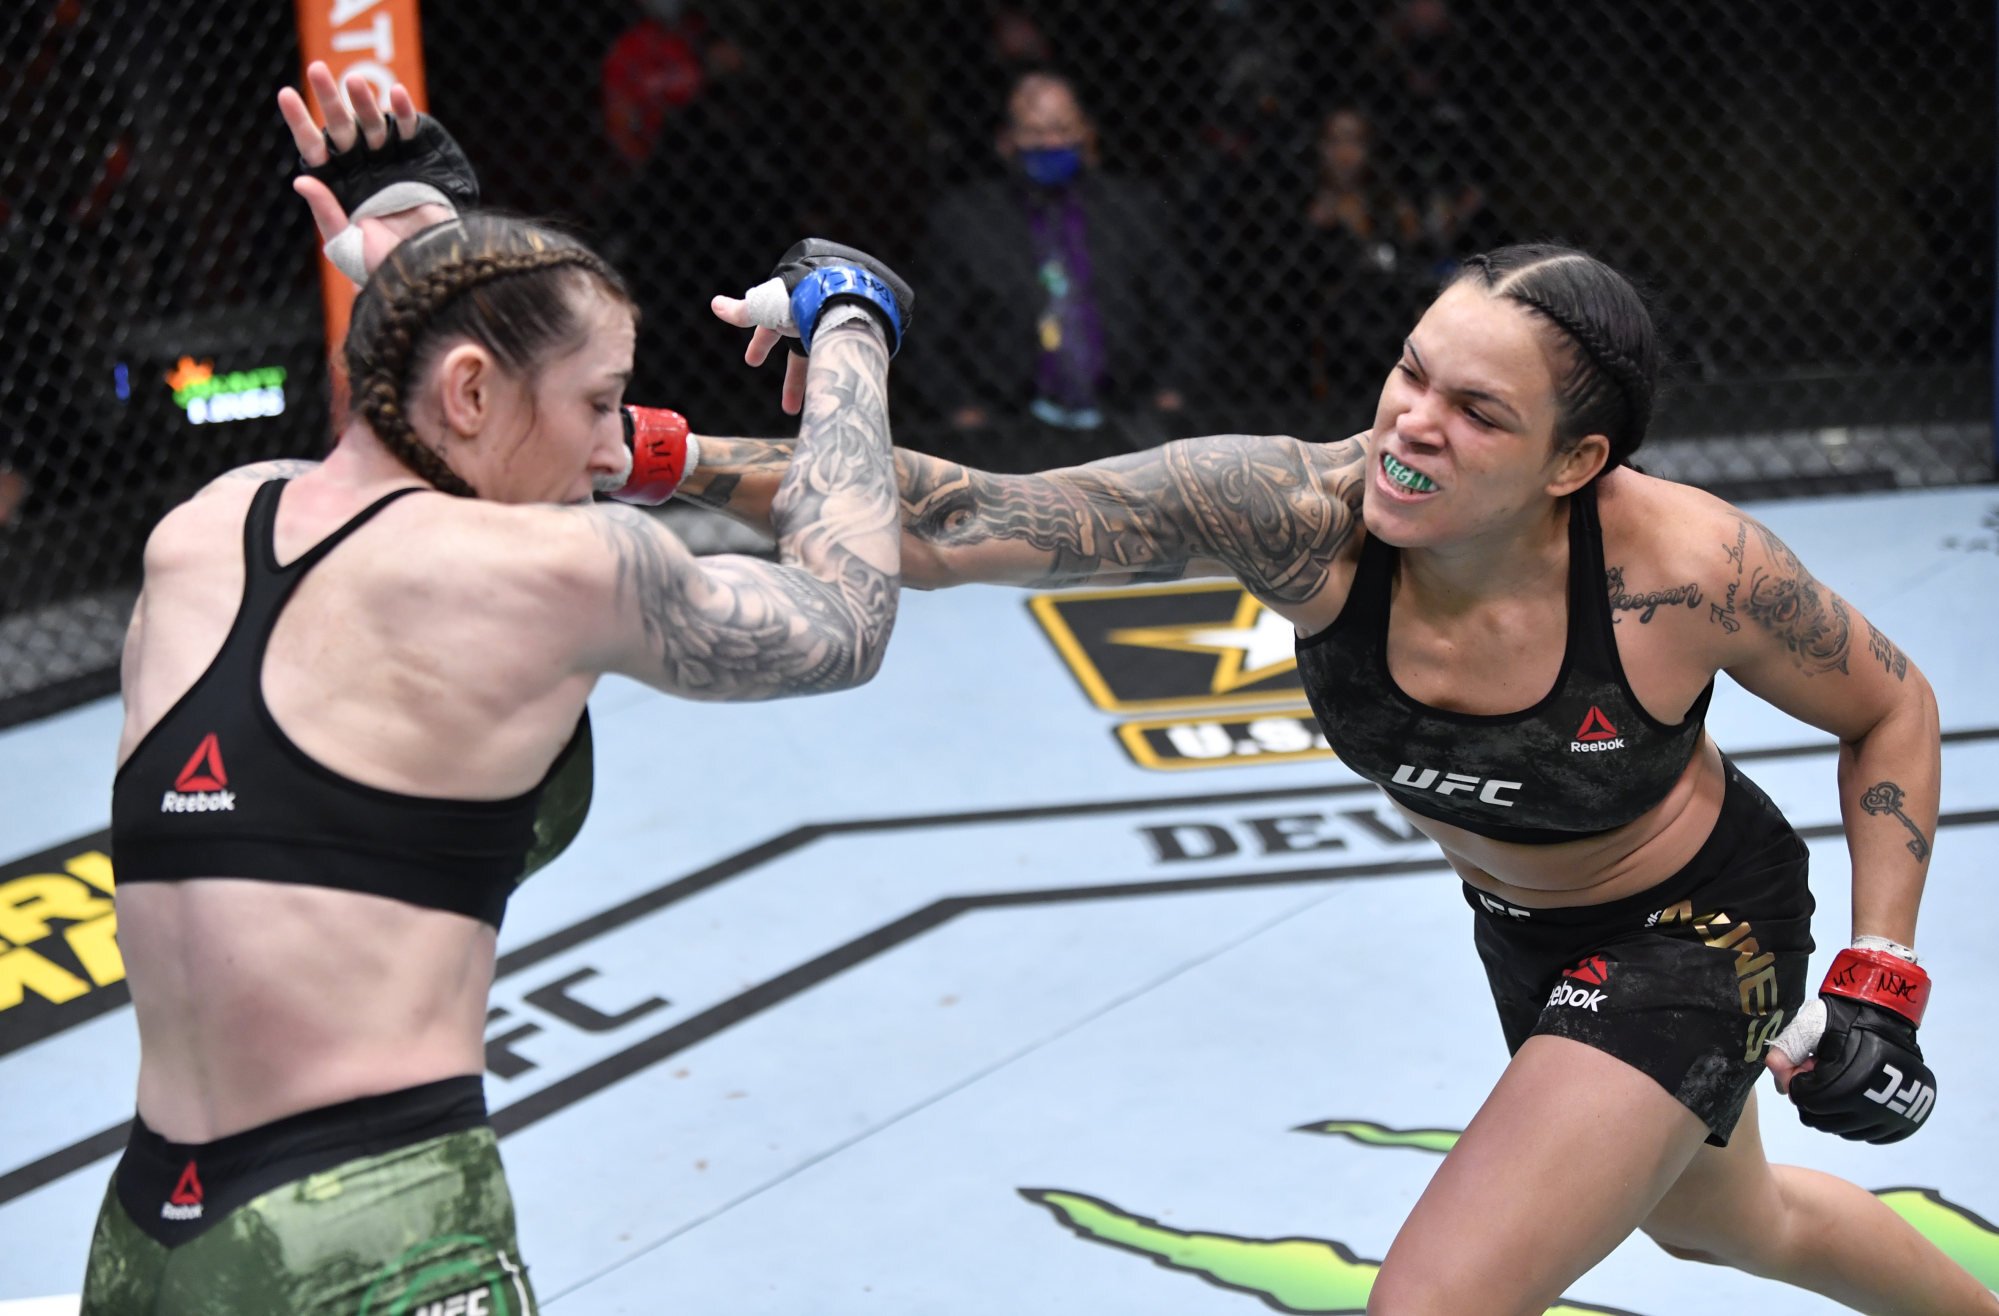 Amanda Nunes Is Ufcs First Openly Lesbian Fighter 7 Things To Know About The Lgbt Double